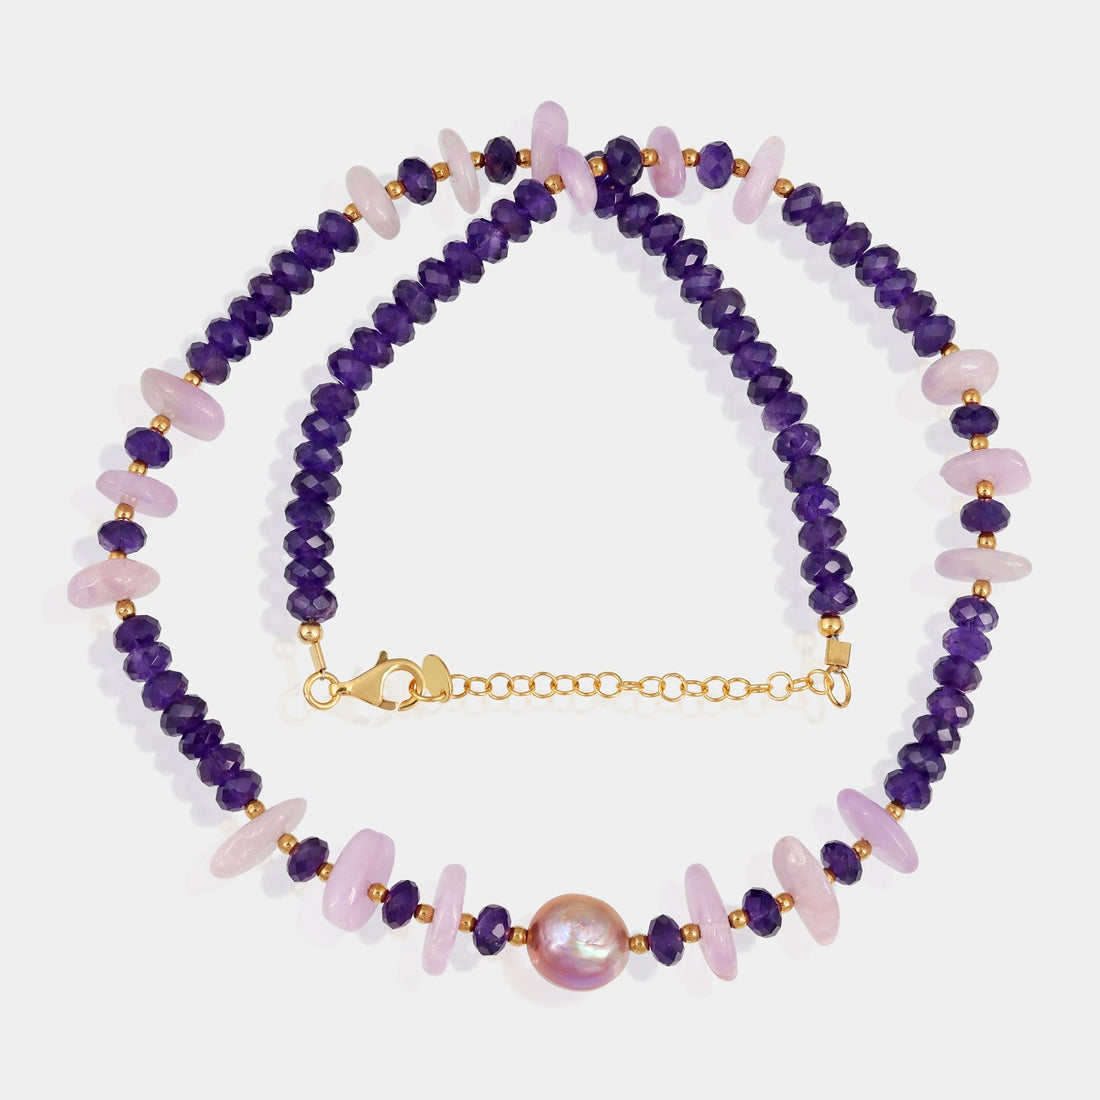 Exquisite 925 Silver Necklace with Amethyst, Kunzite, Pearl, and Hematite Gemstone Beads - A stunning combination of captivating colors and positive energies.